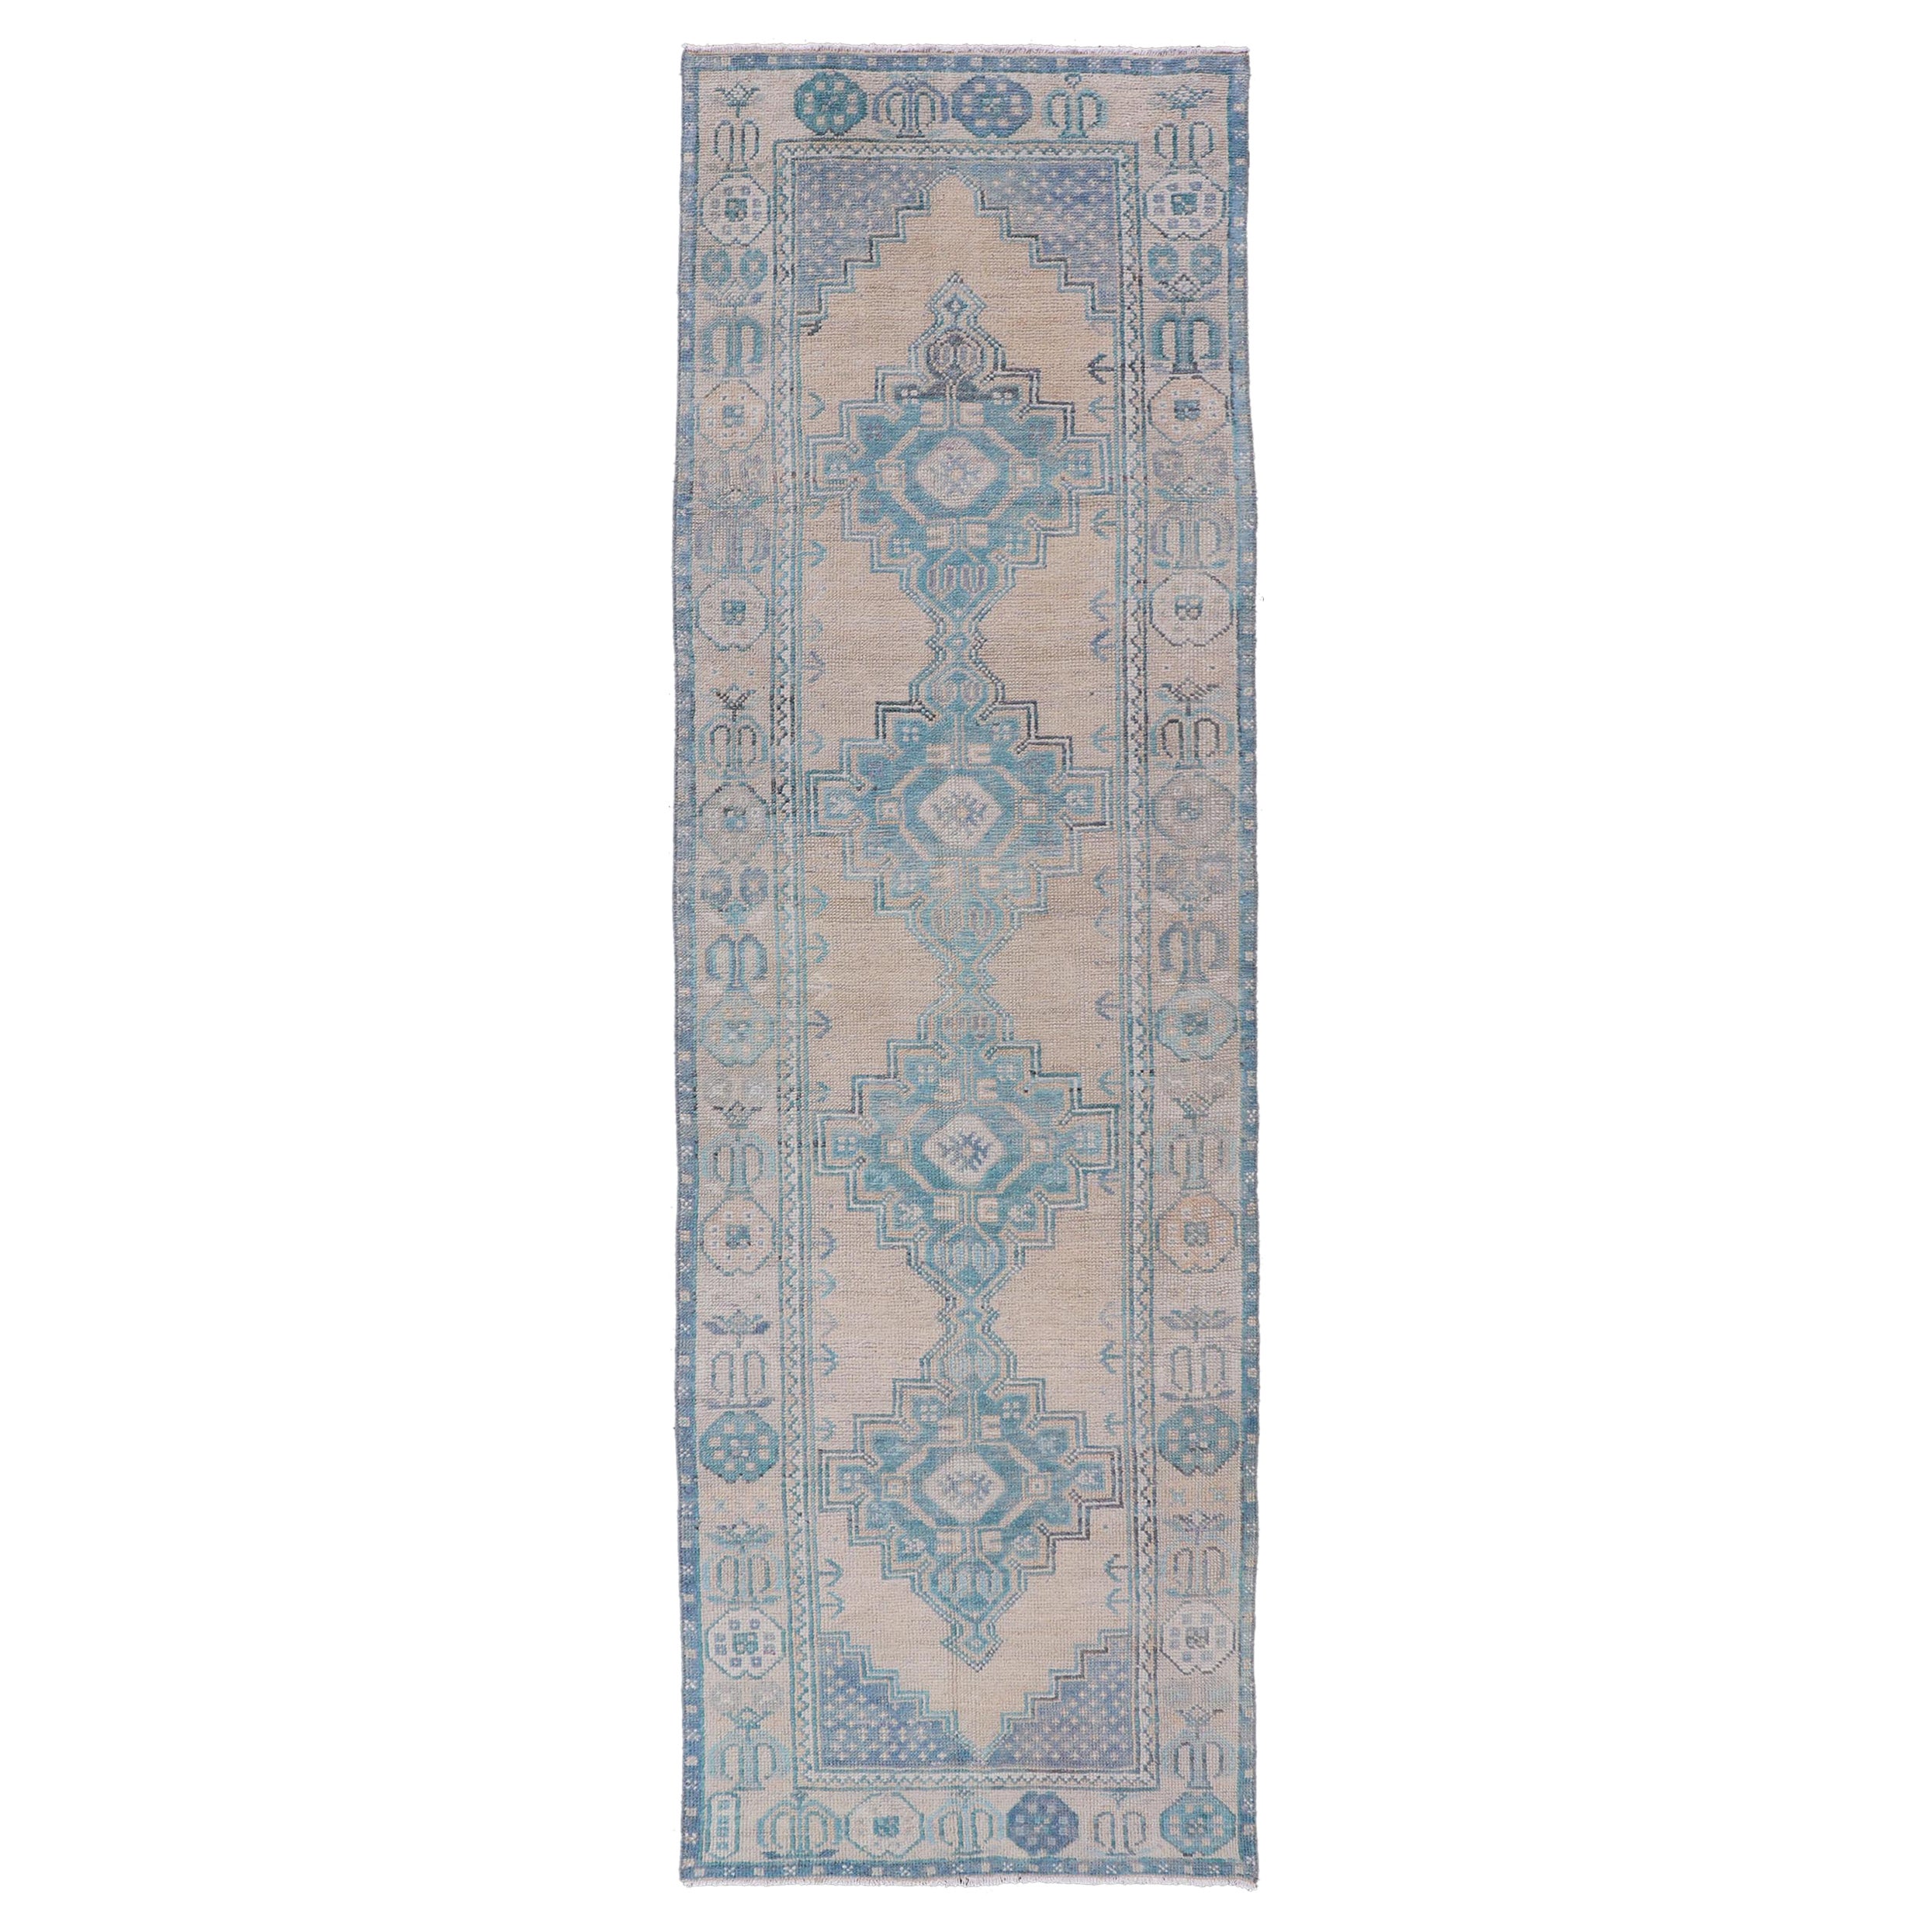 Turkish Vintage Oushak Runner with Geometric Medallion Design in Blues and Beige